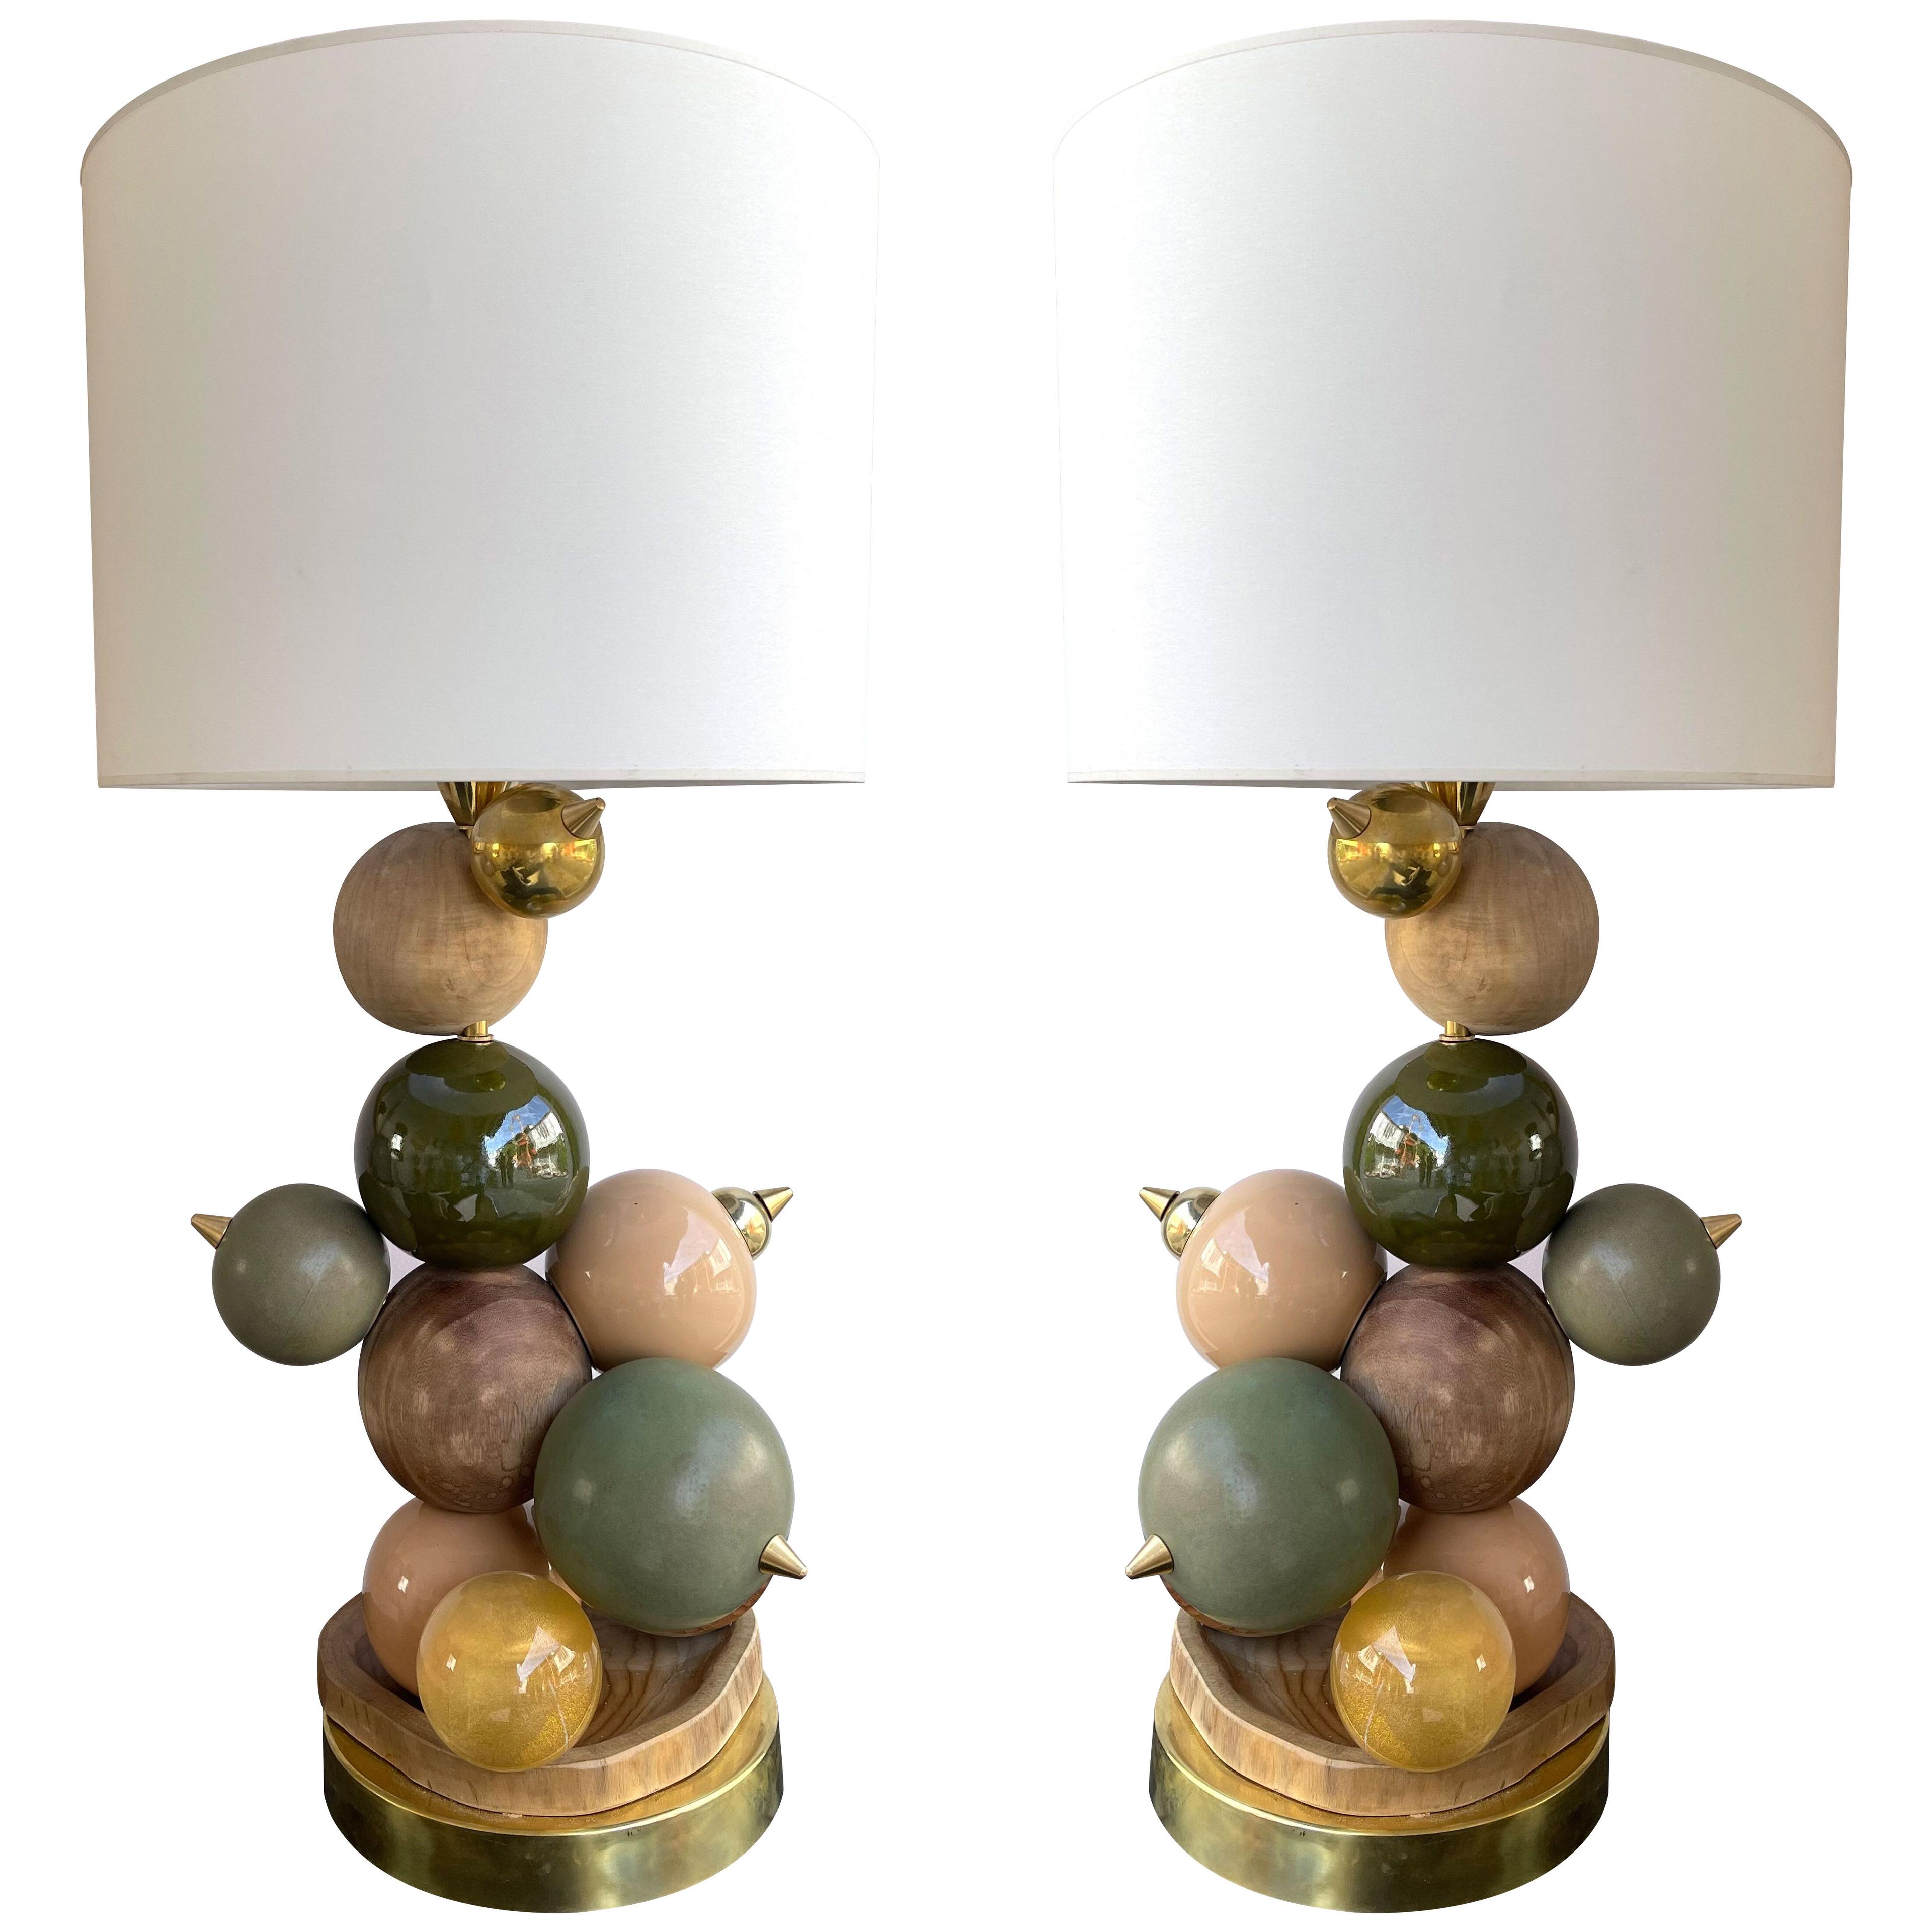 Contemporary Pair of Brass Murano Glass Wood and Ceramic Atomo Lamps, Italy